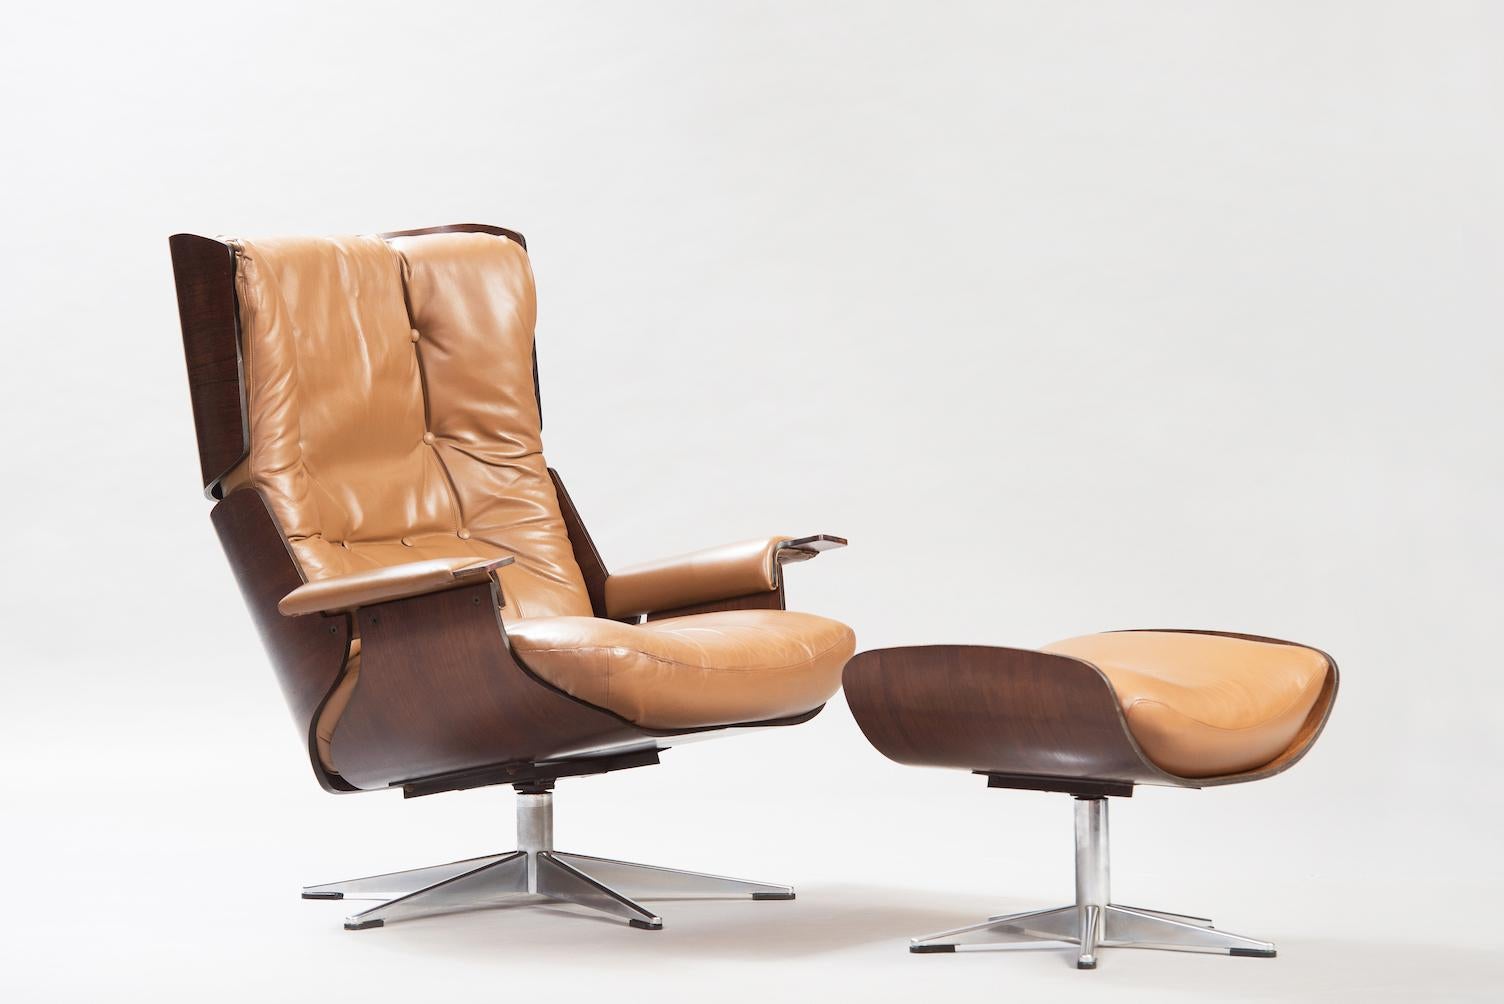 Rosewood and chrome swivel lounge chair with ottoman, upholstered in brown leather.